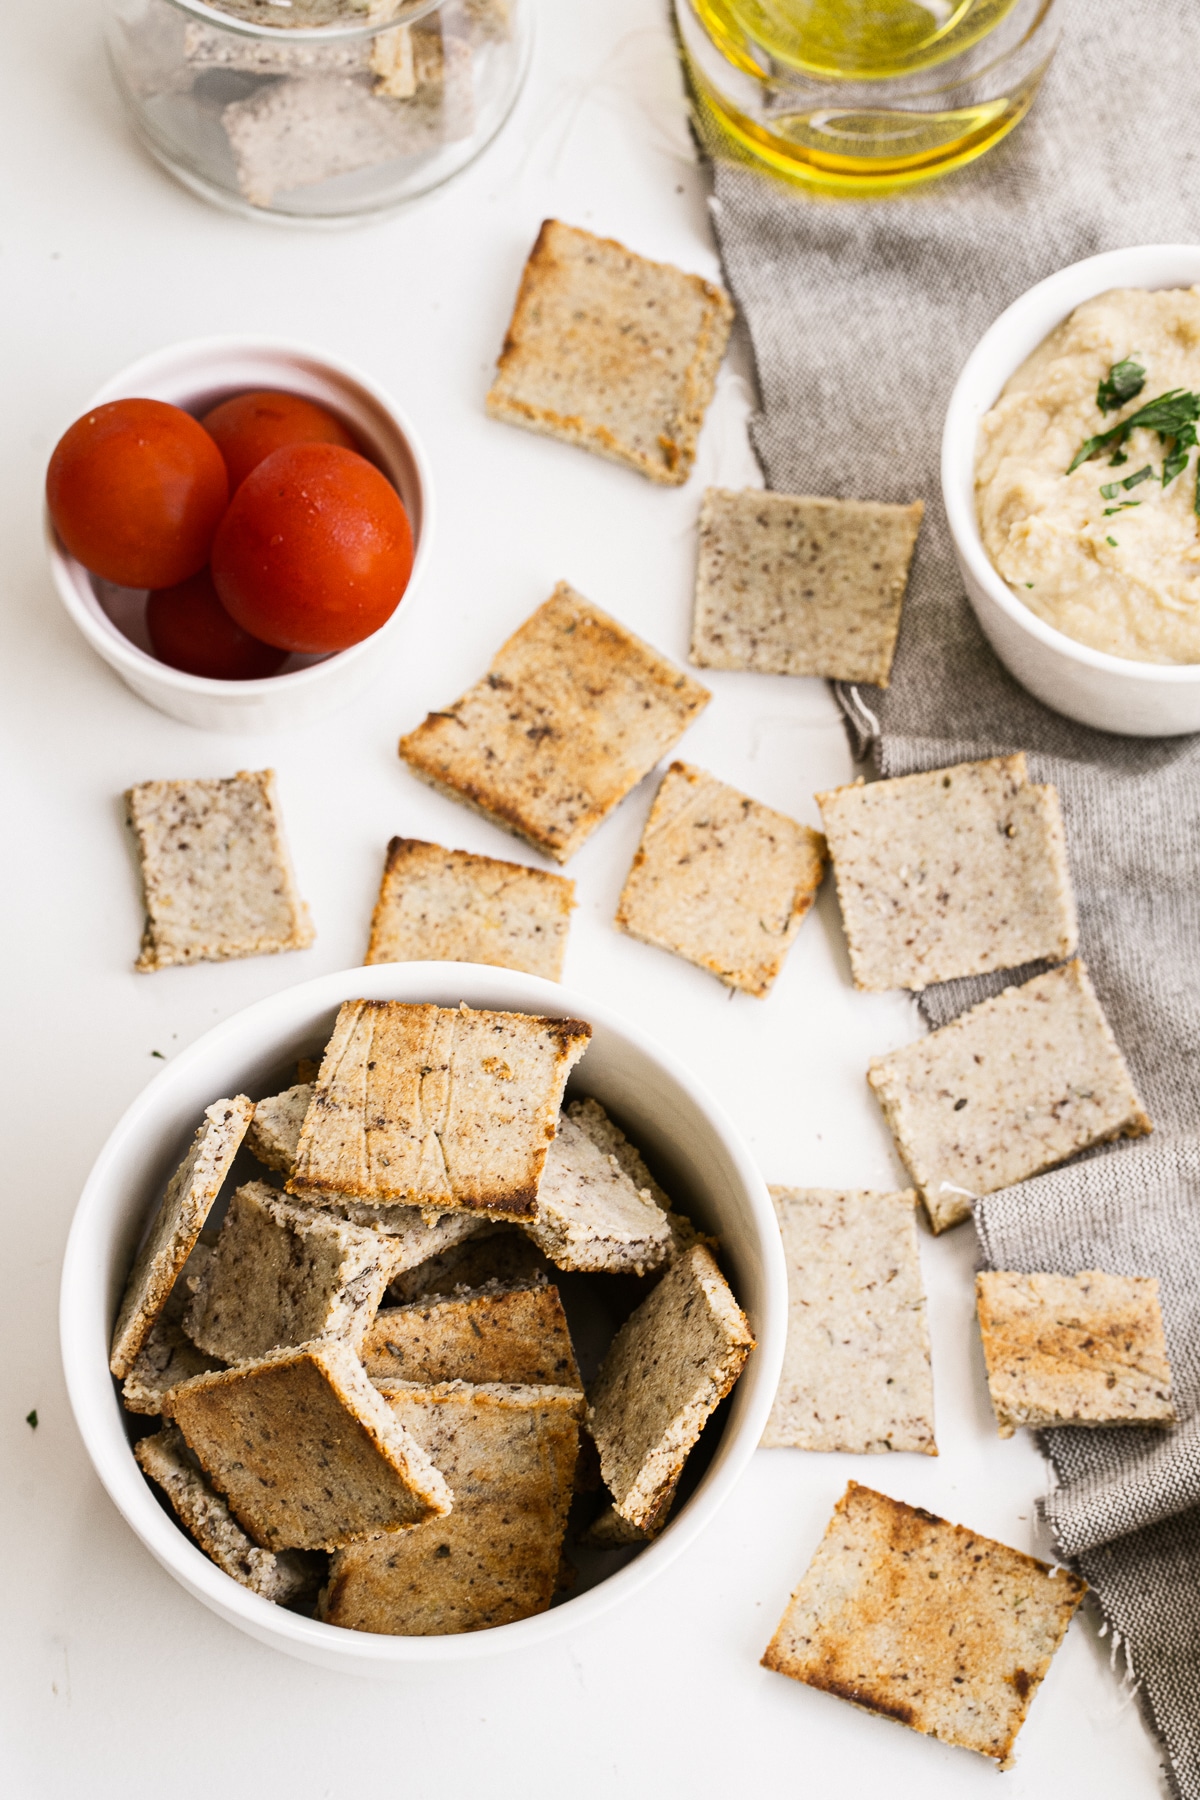 Simple to make, light and crunchy, these Cheesy Almond Flour Crackers make the perfect low carb snack!